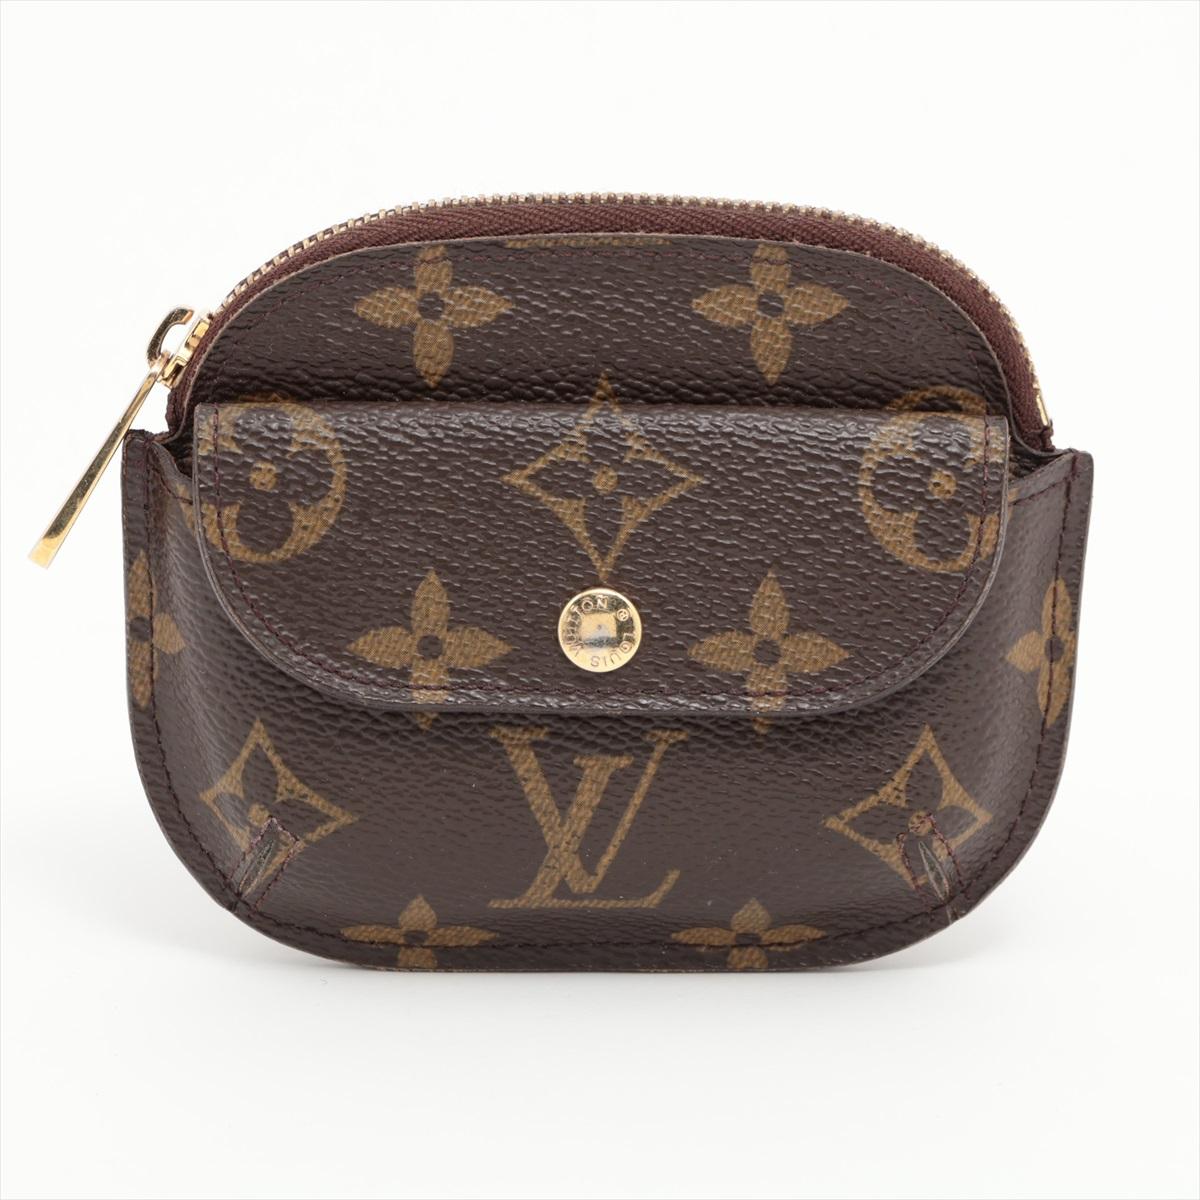 The Louis Vuitton Monogram Shilling Coin Case is a compact and stylish accessory that merges classic design with practical functionality. Crafted with the iconic LV monogram canvas, the coin case showcases the timeless elegance synonymous with the